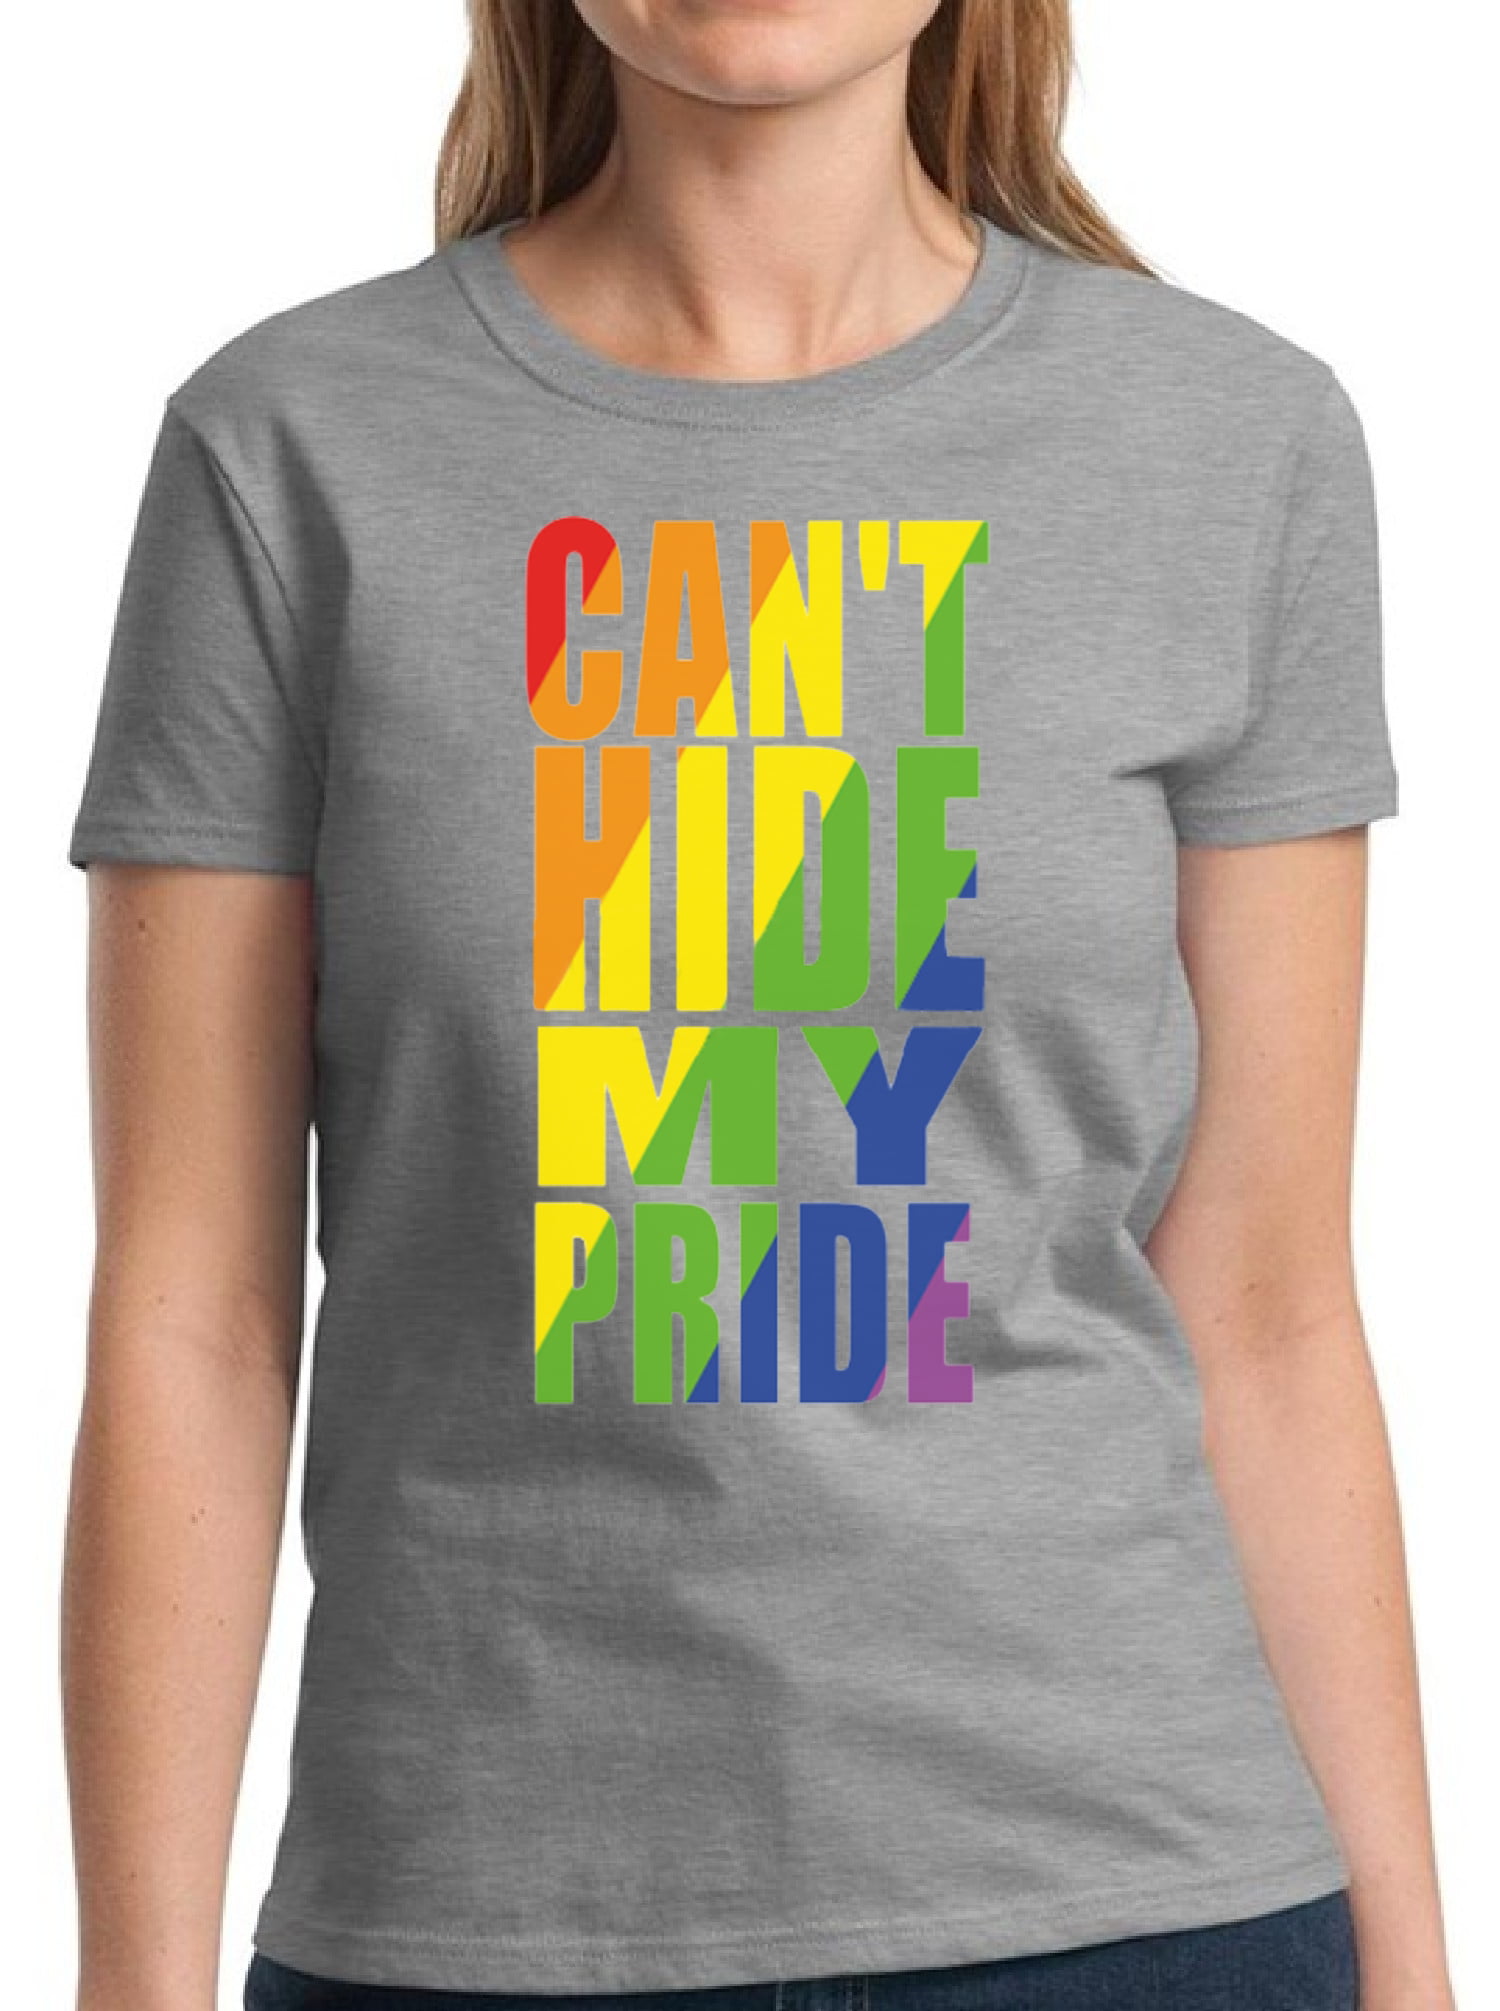 LGBT Can't Hide My Pride T-Shirt for Women - S M L XL 3XL Graphic - Pride Support Tee Shirt Gift Walmart.com